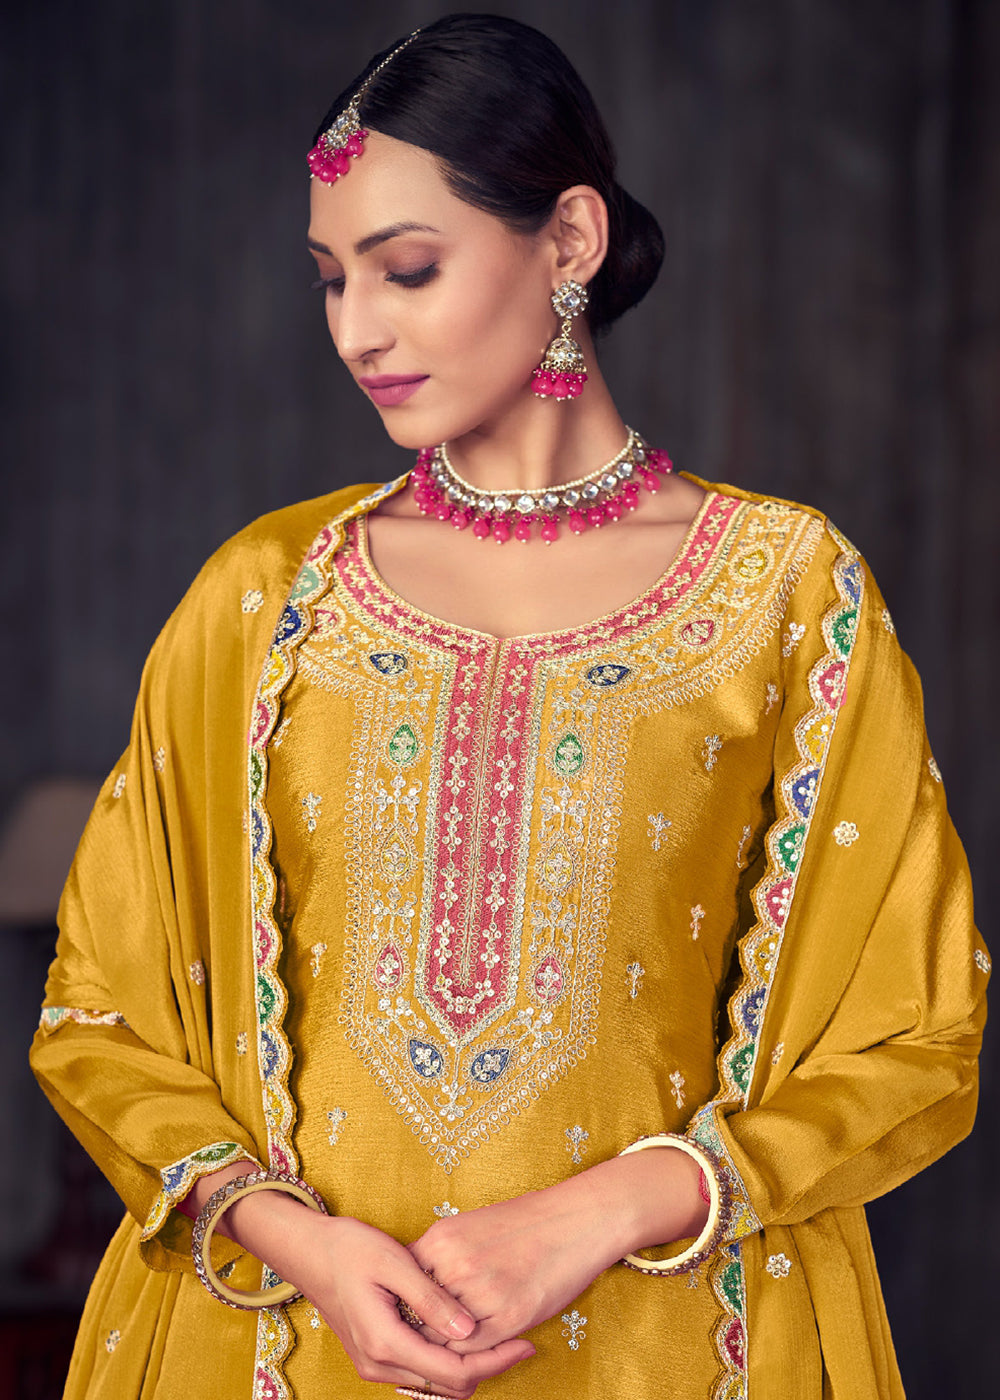 Buy Now Mustard Heavy Chinnon Embroidered Lehenga Kurti Suit Online in USA, UK, Canada, Germany, Australia & Worldwide at Empress Clothing.